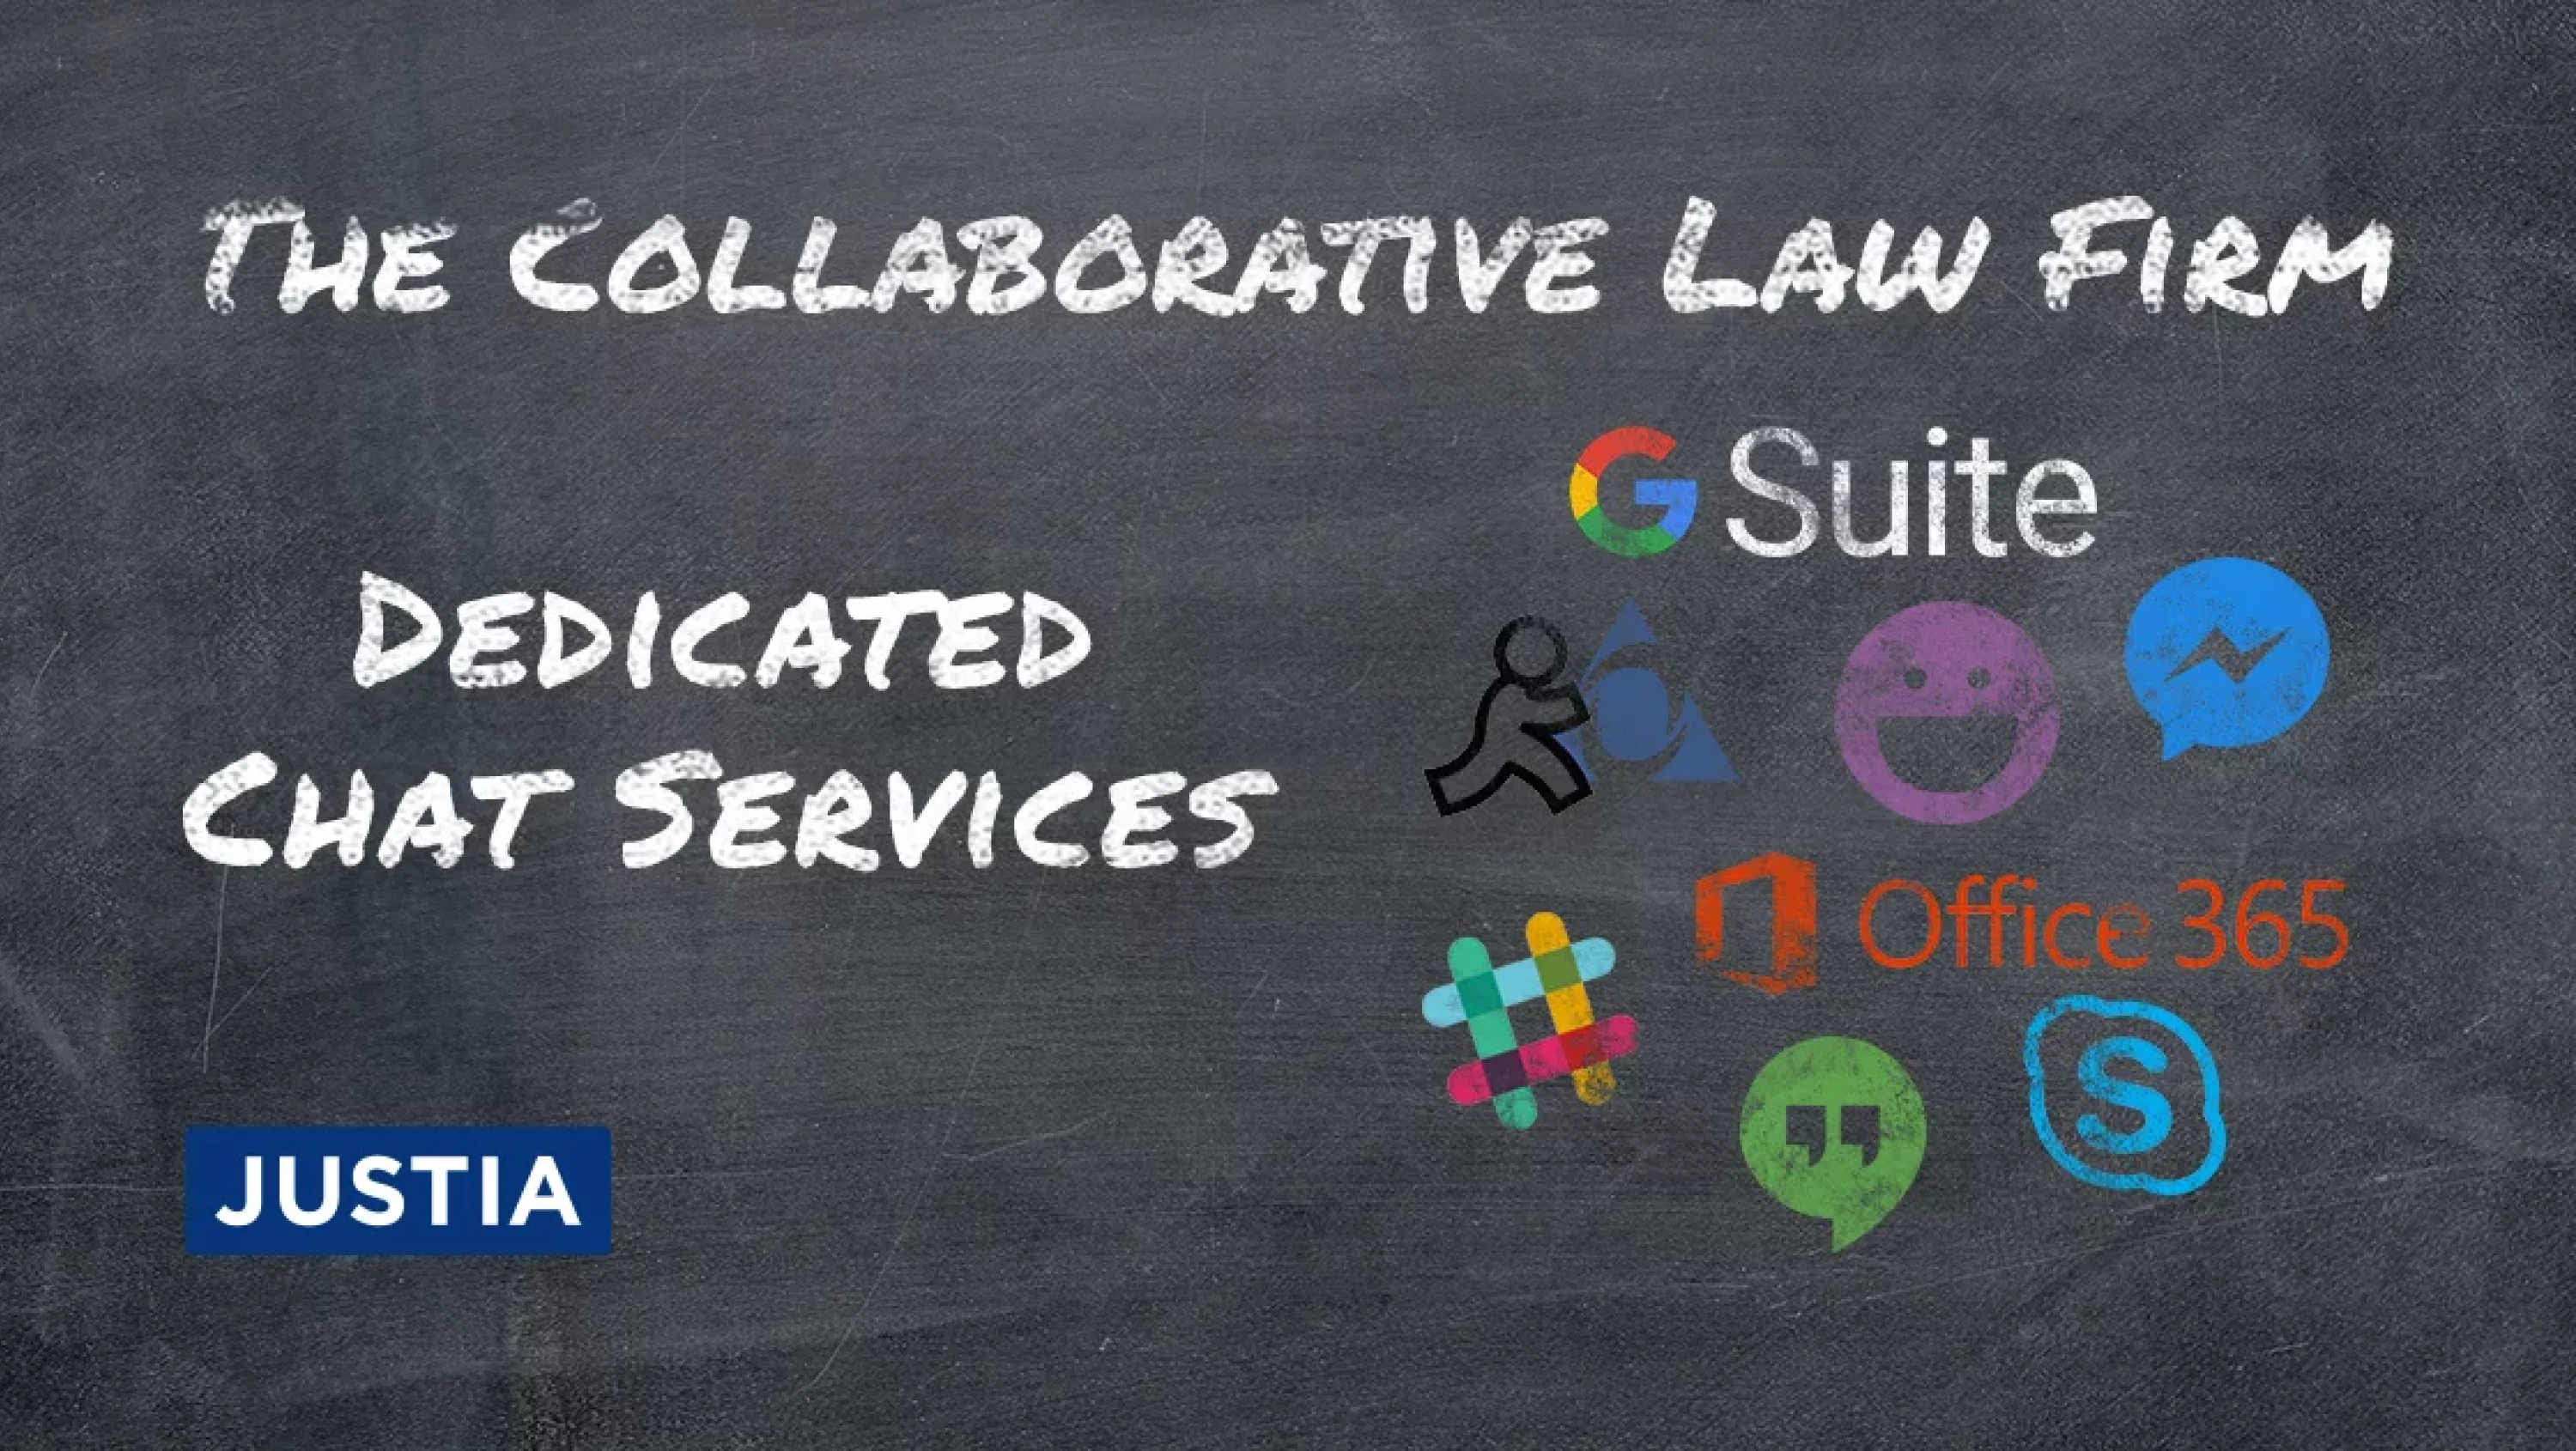 The Collaborative Law Firm: Part 2: Multi-User Chat